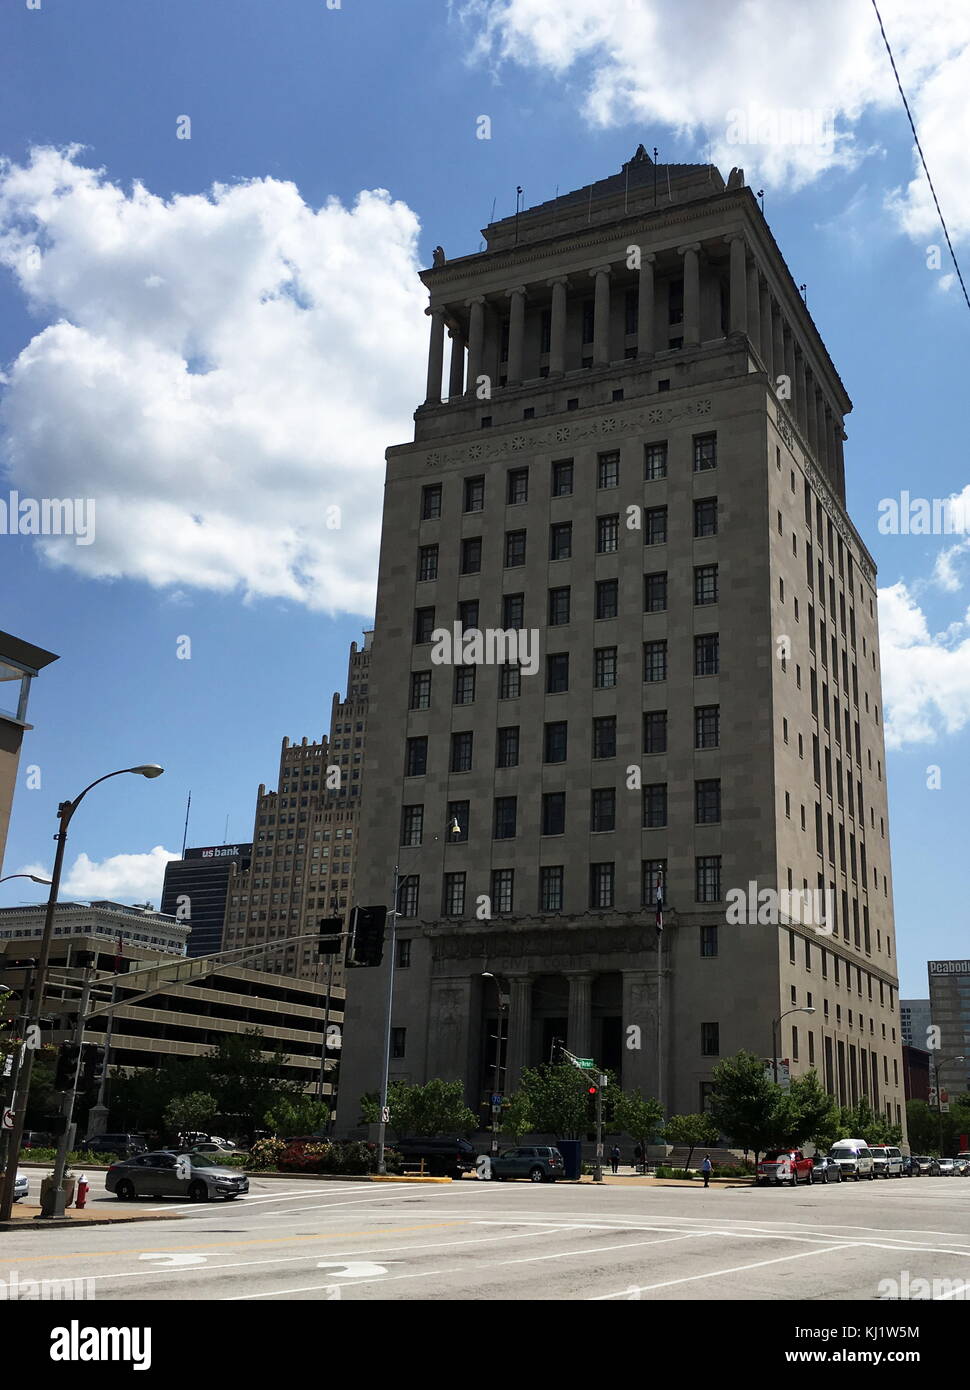 View of the Civil Courts Building, a landmark court building used by the 22nd Judicial Circuit Court of Missouri in St. Louis, Missouri. Dated 21st Century Stock Photo